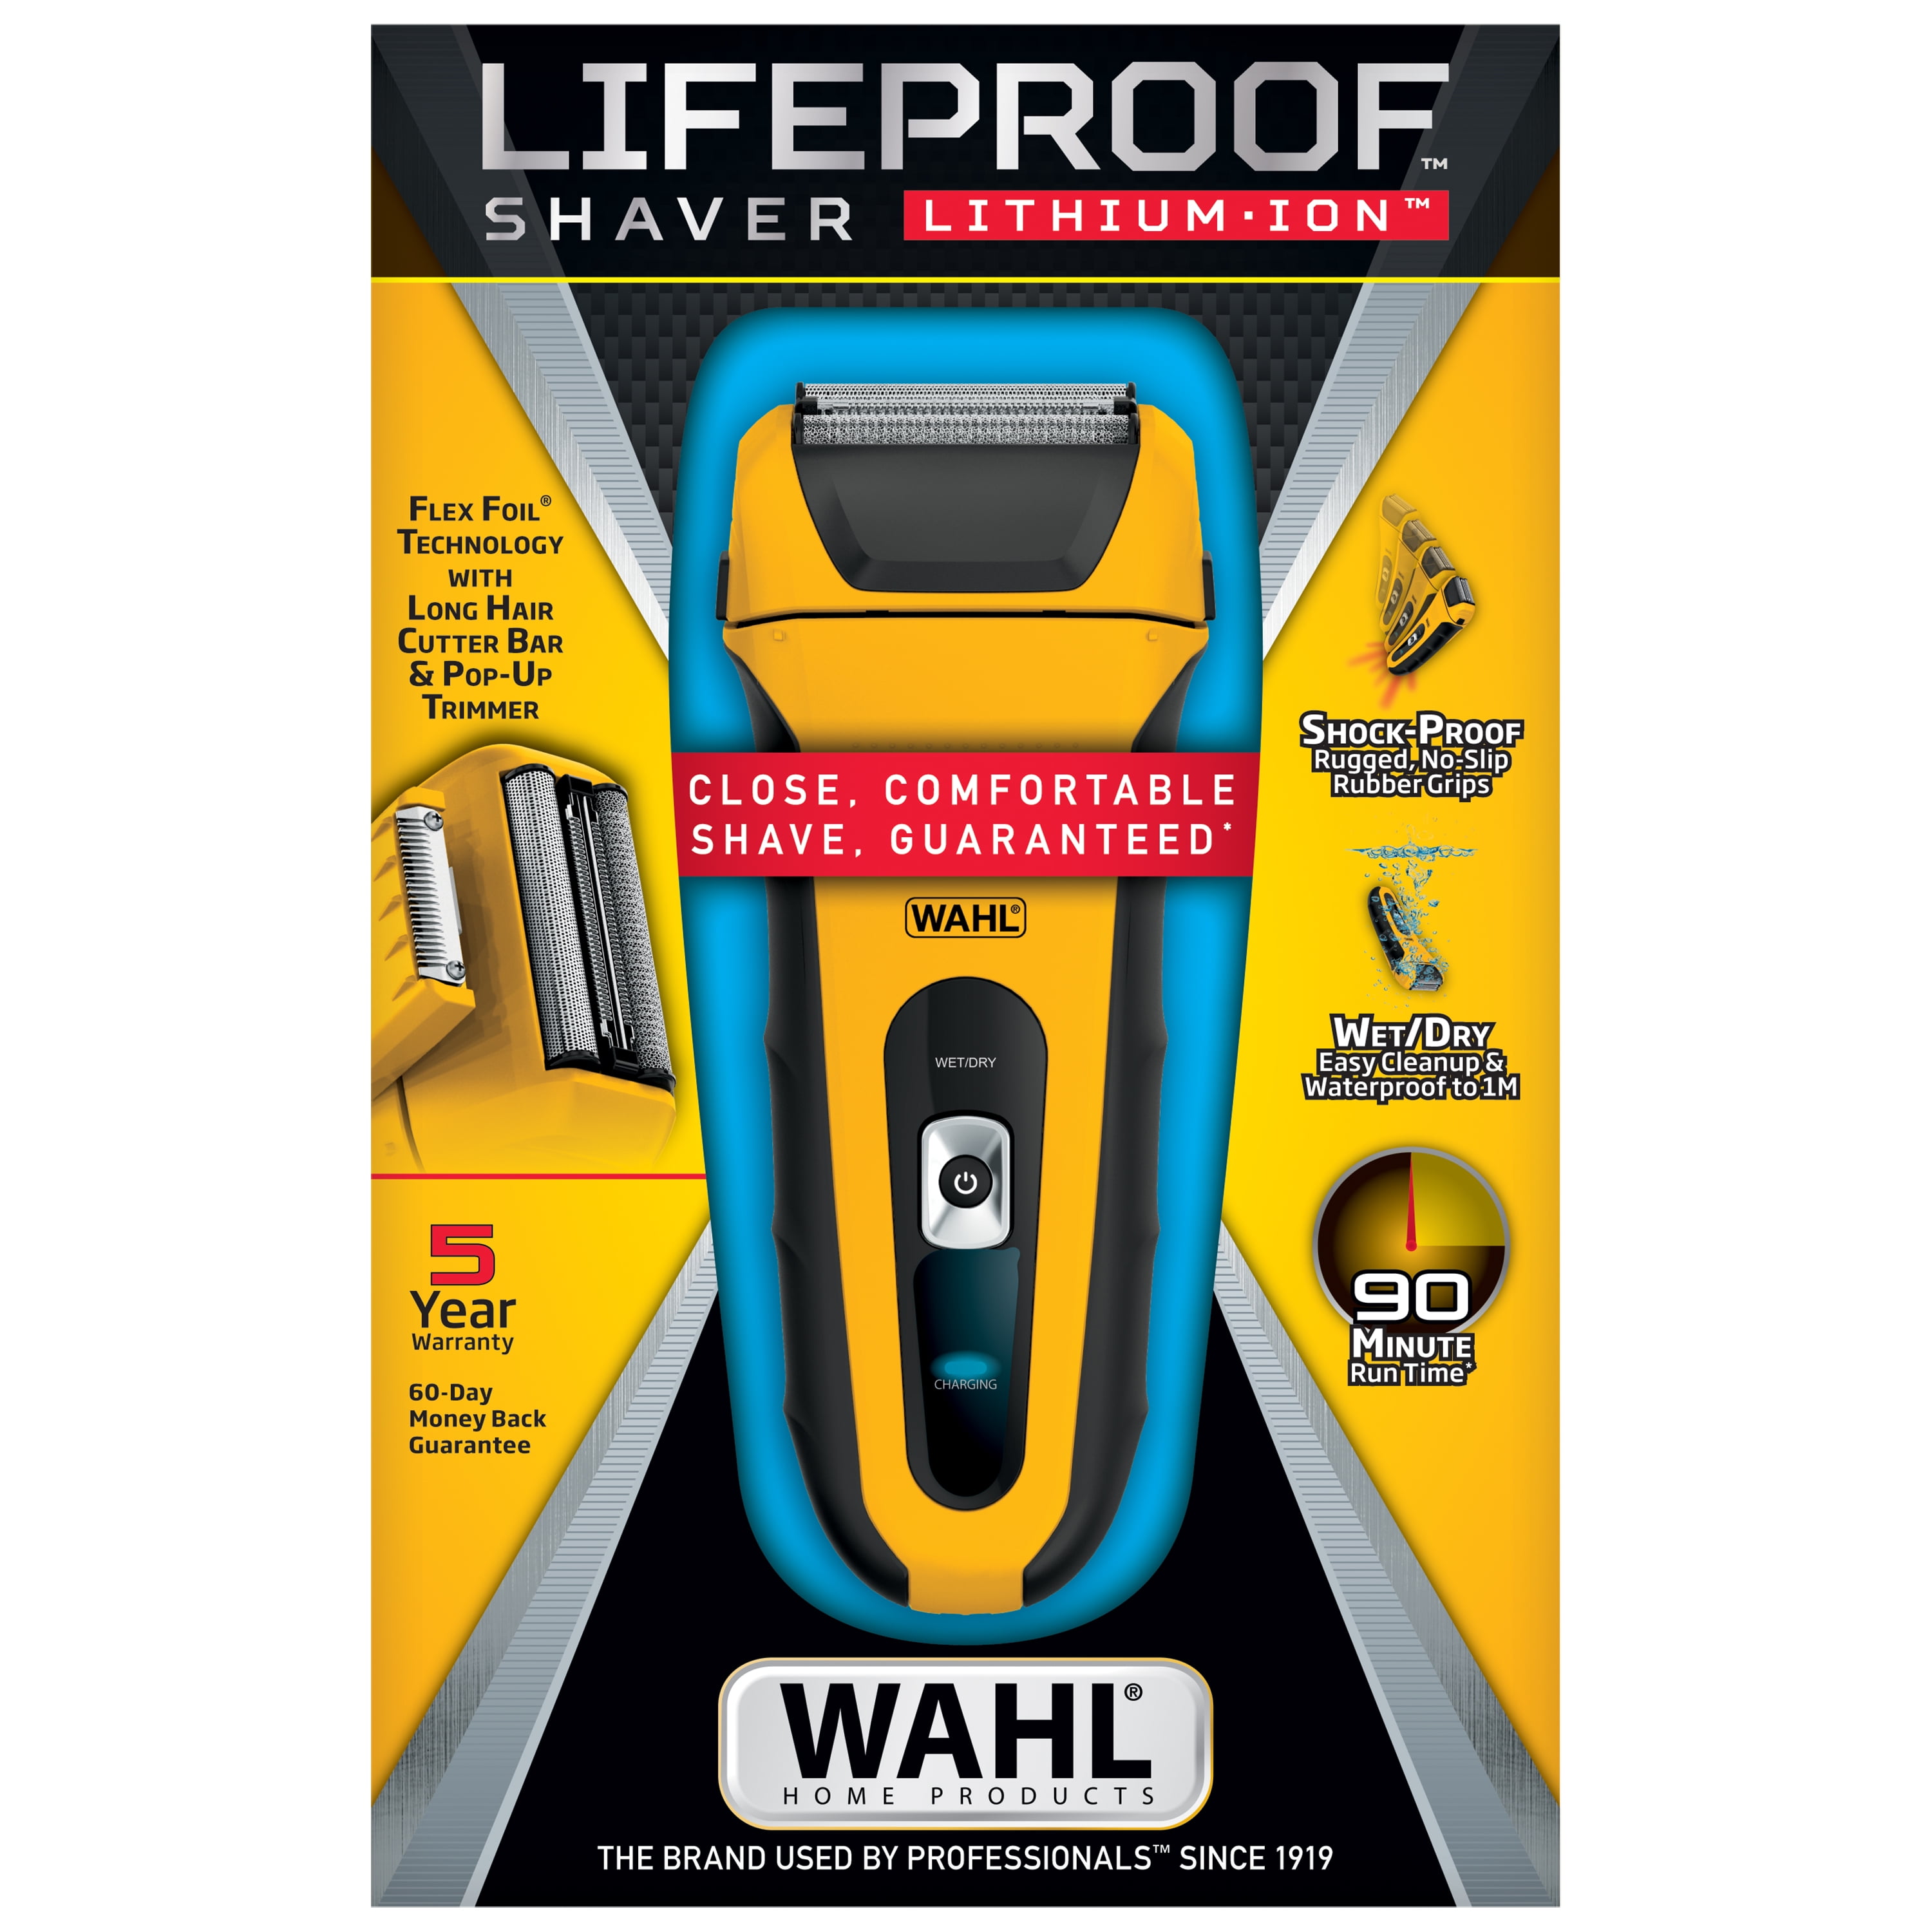 Wahl Lifeproof Shaver Review: Tough and cheap